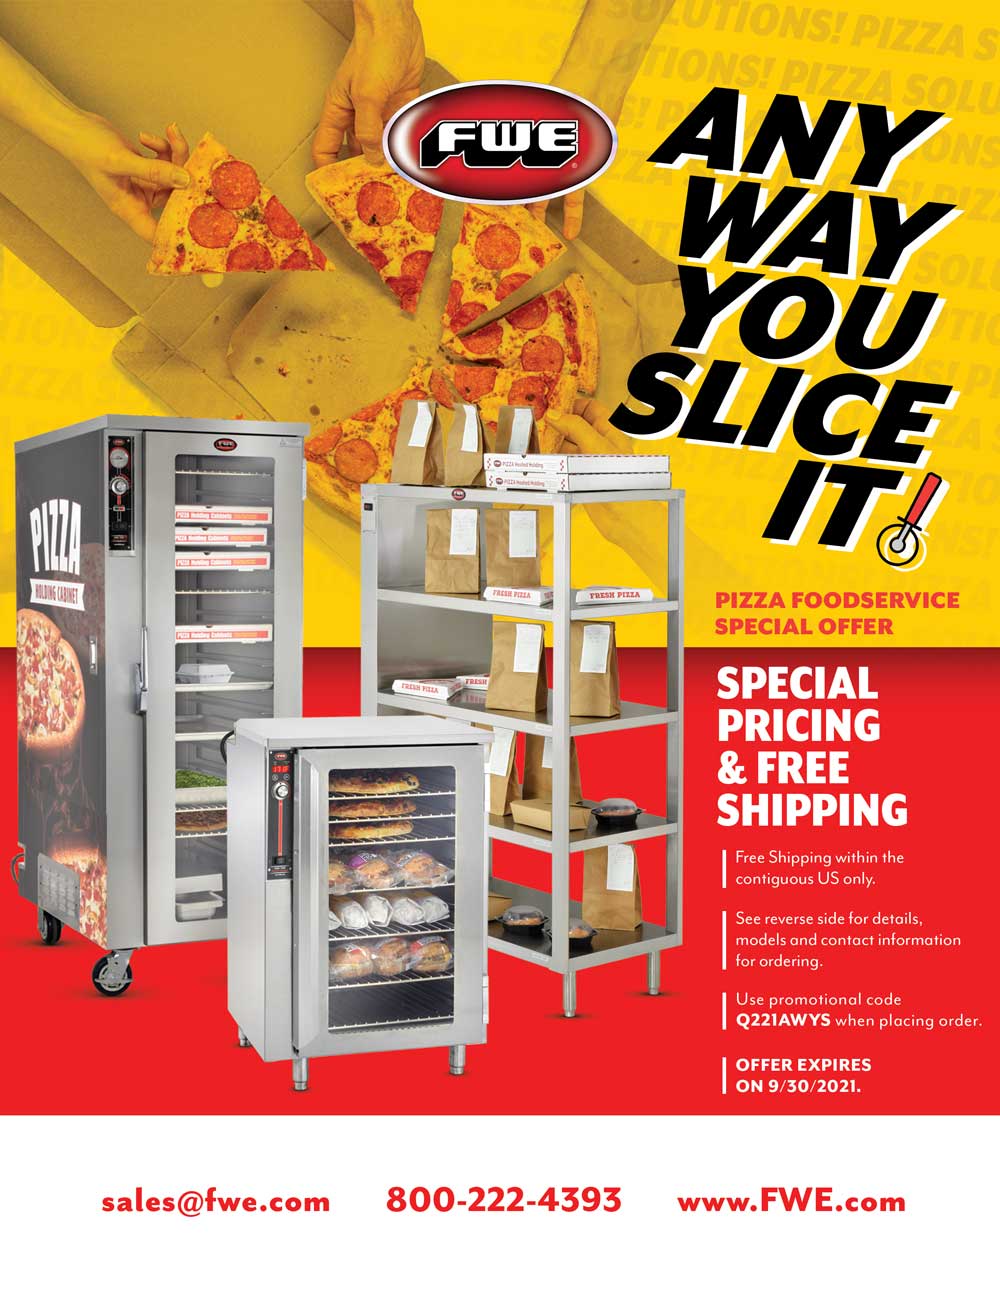 ANY WAY YOU SLICE IT! FWE has a Special Offer for Pizza Operations!